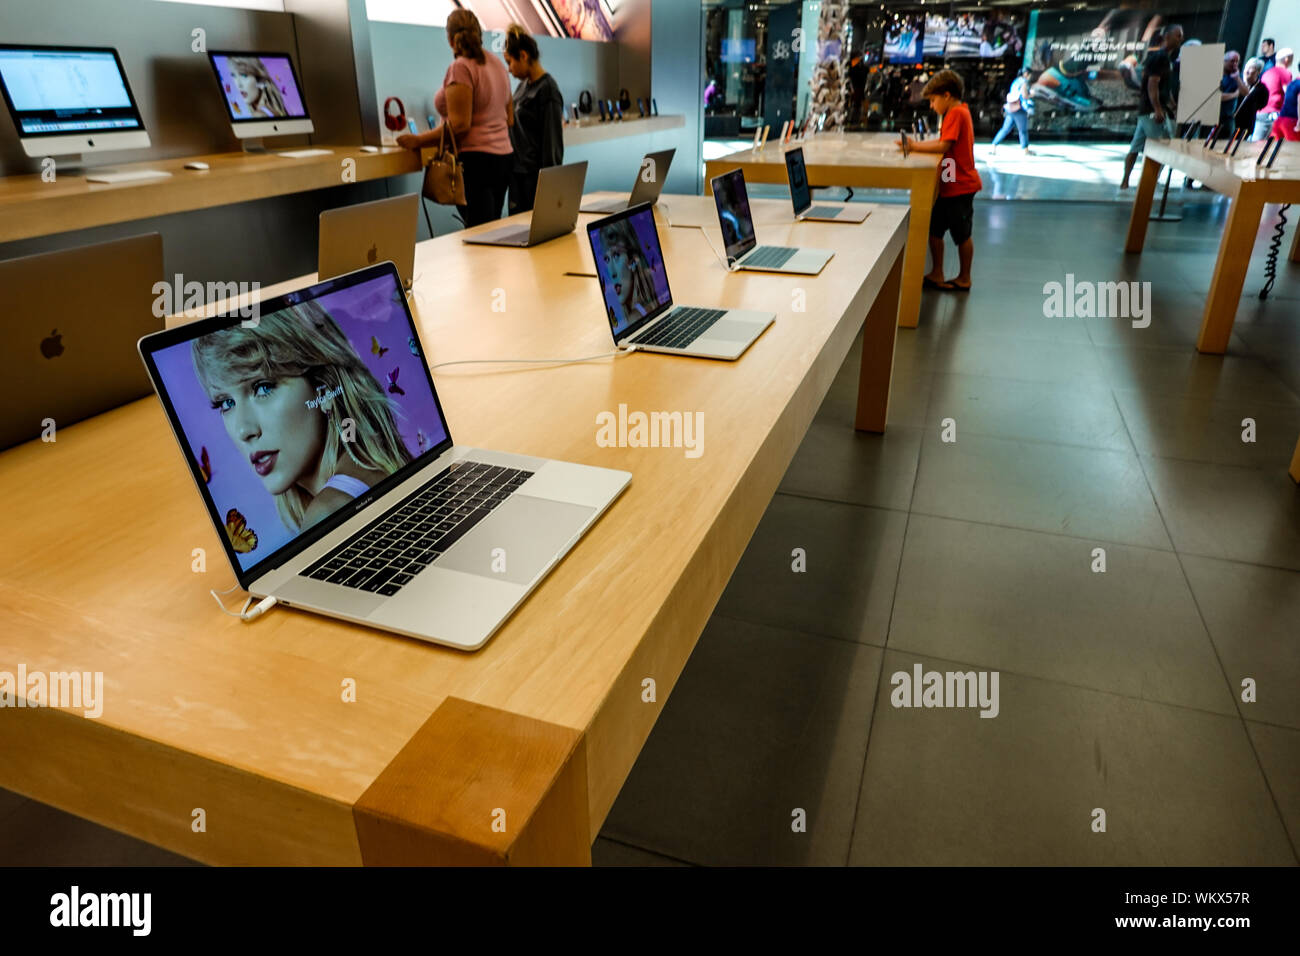 Orlando,FL/USA-8/27/19: A row of MacBook Pros on display at a retail store. Stock Photo